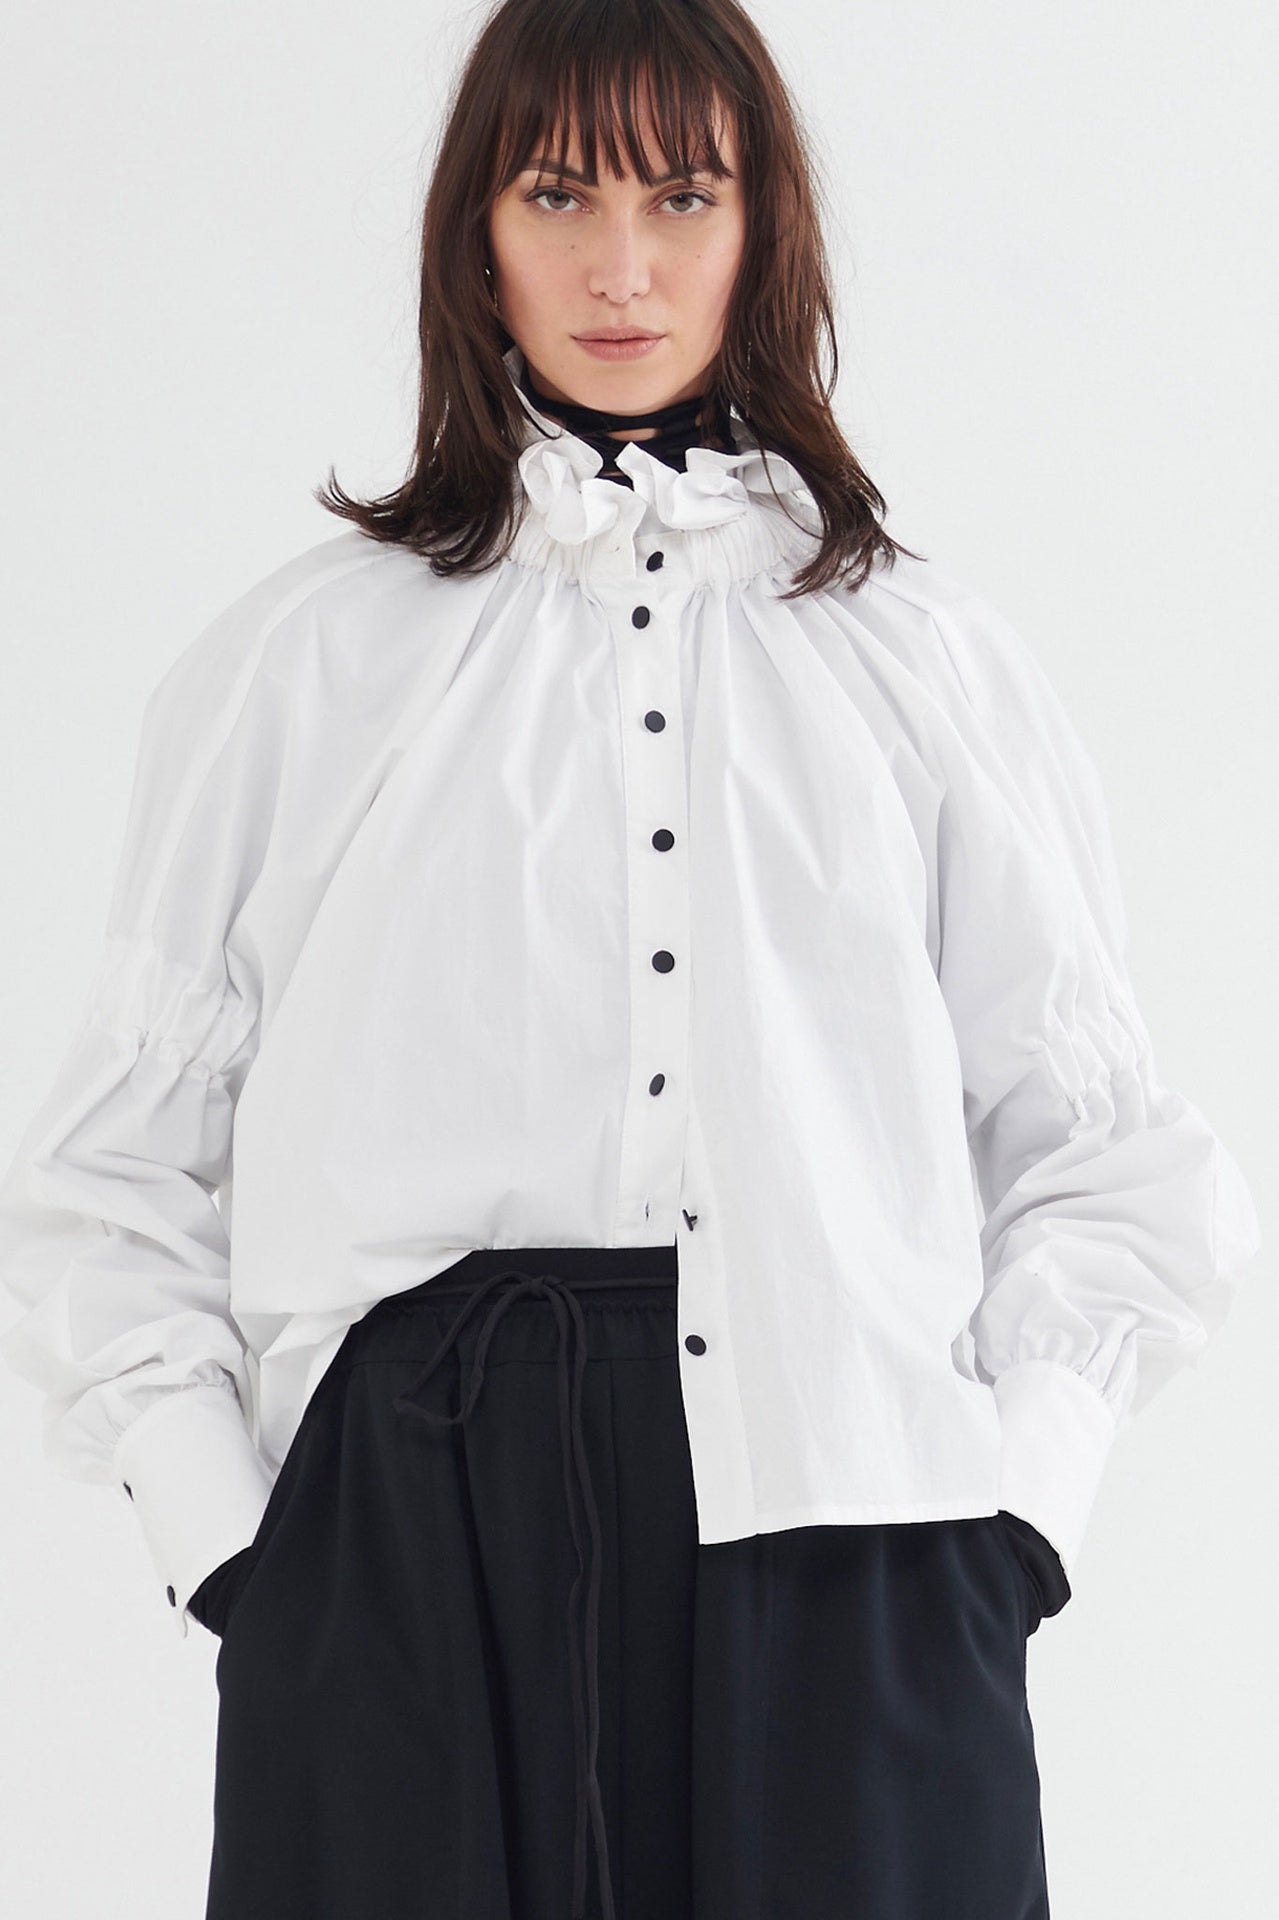 Overture Shirt - White Cotton in Ivory - The Shelter